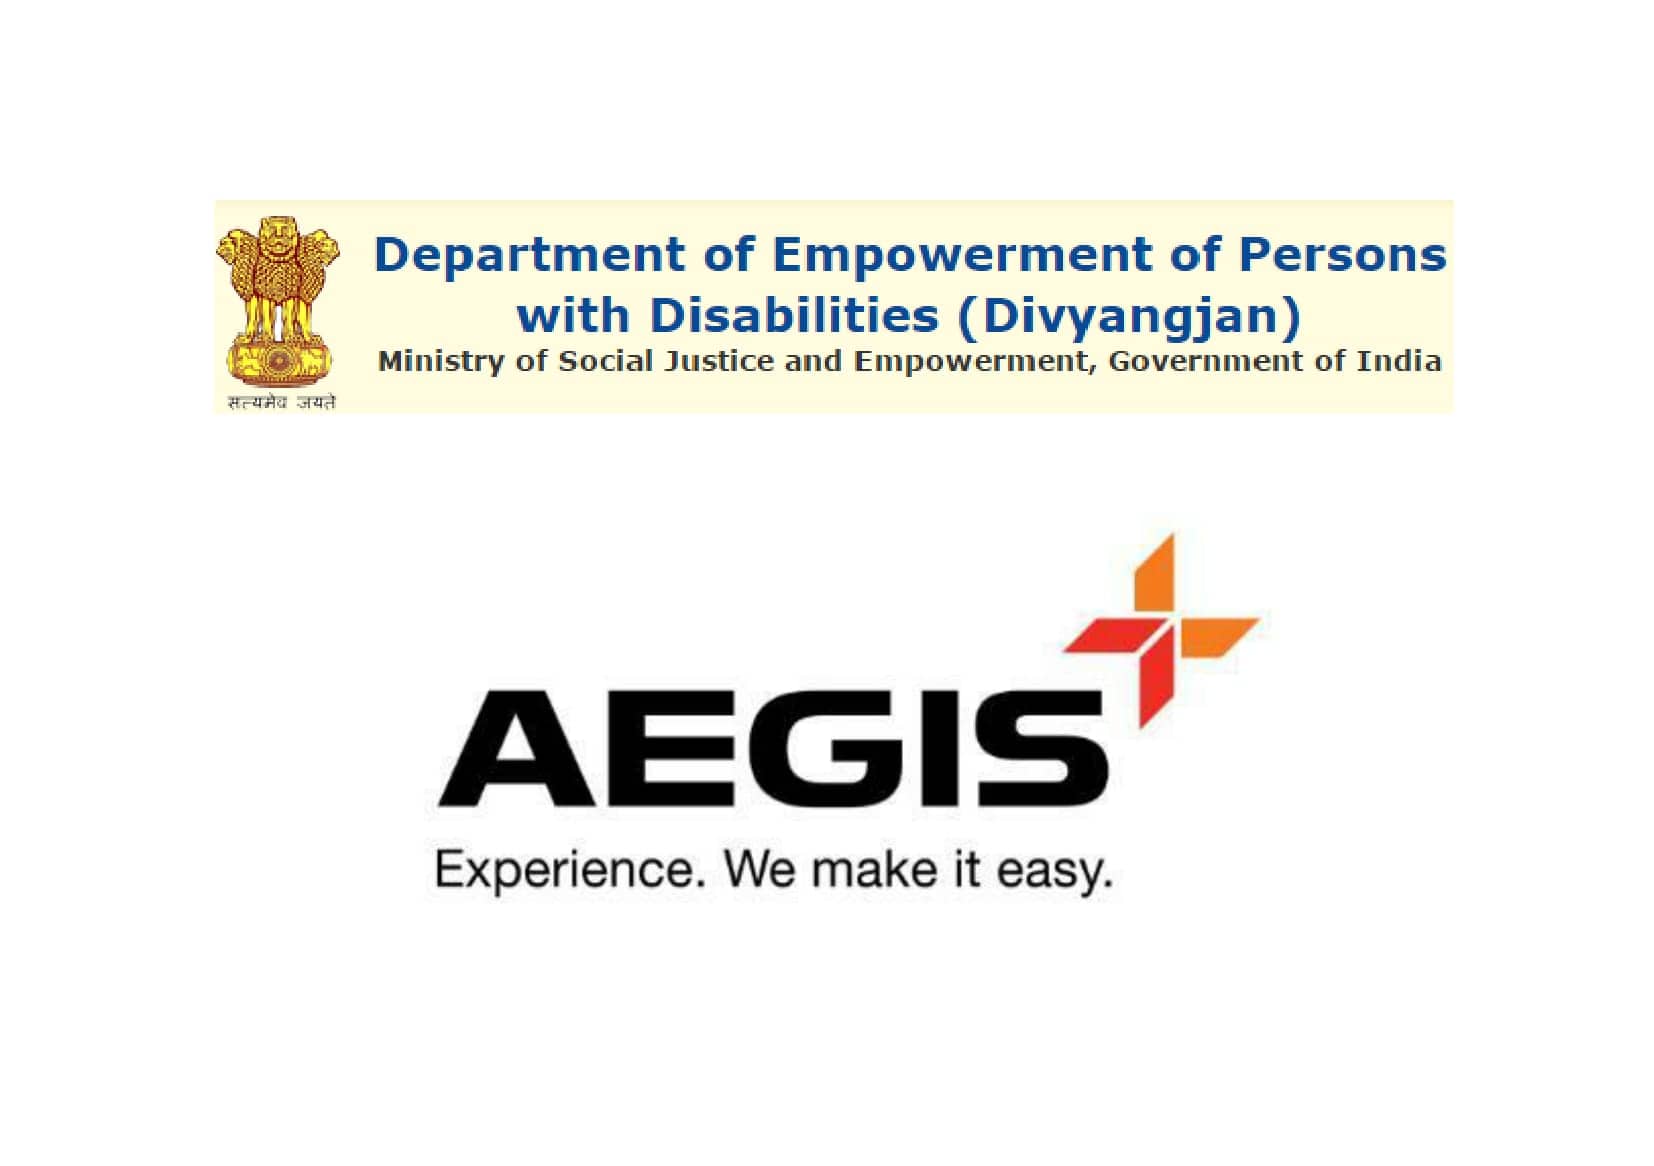 Aegis honored with the National Award 2016 for the Empowerment of Persons with Disabilities (PwD) by the Ministry of Social Justice & Empowerment, Government of India. | Aegis is a global outsourcing and technology services company committed to impacting clients' business outcomes by focusing on enhancing customer experience across all touch points and channels. Aegis has operations in 46 locations across 9 countries with more than 40,000 employees. http://www.aegisglobal.com/